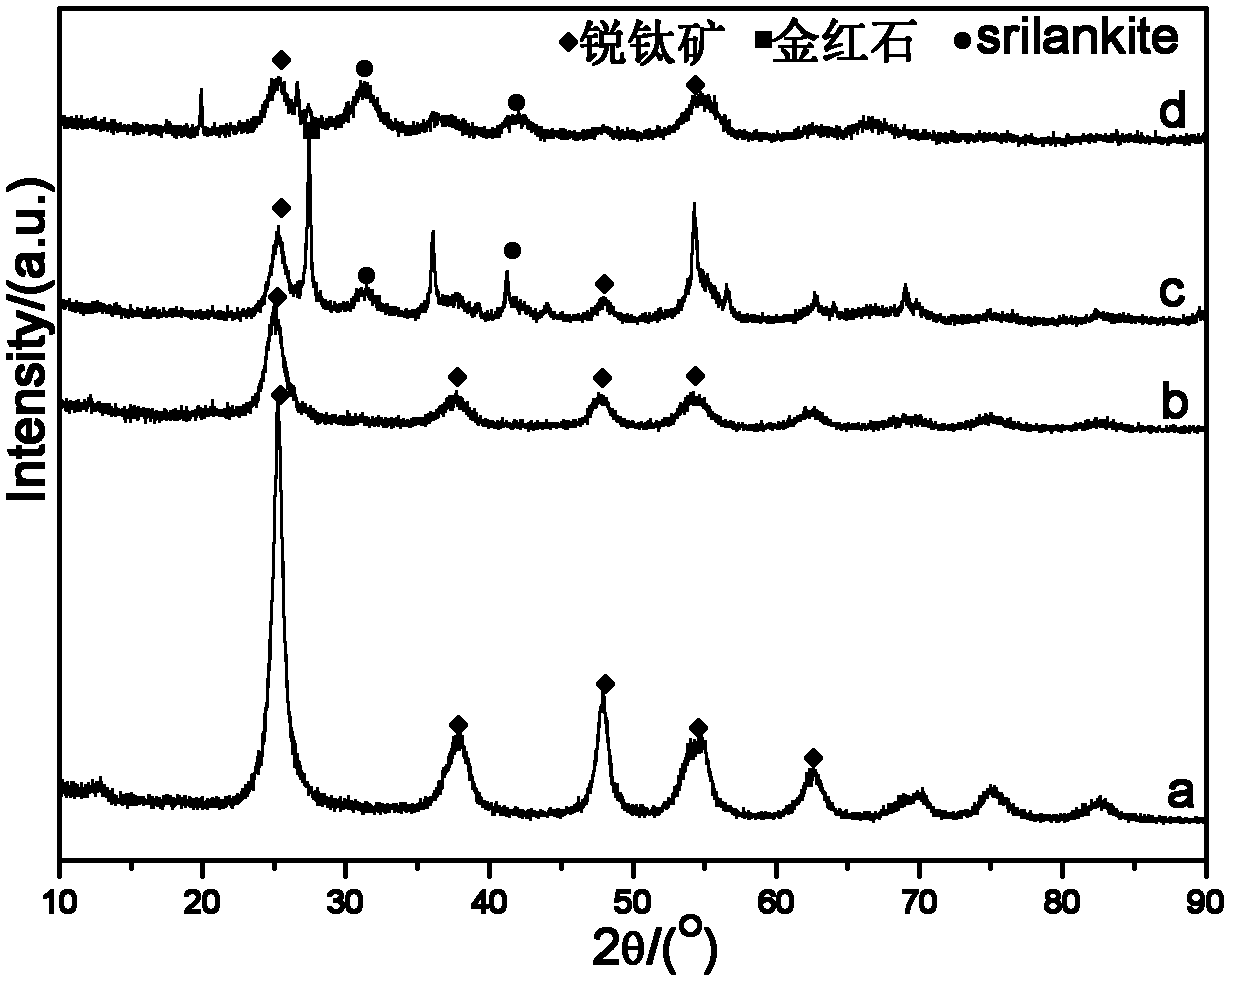 High-quenching-rate material impact synthesis and recovery device